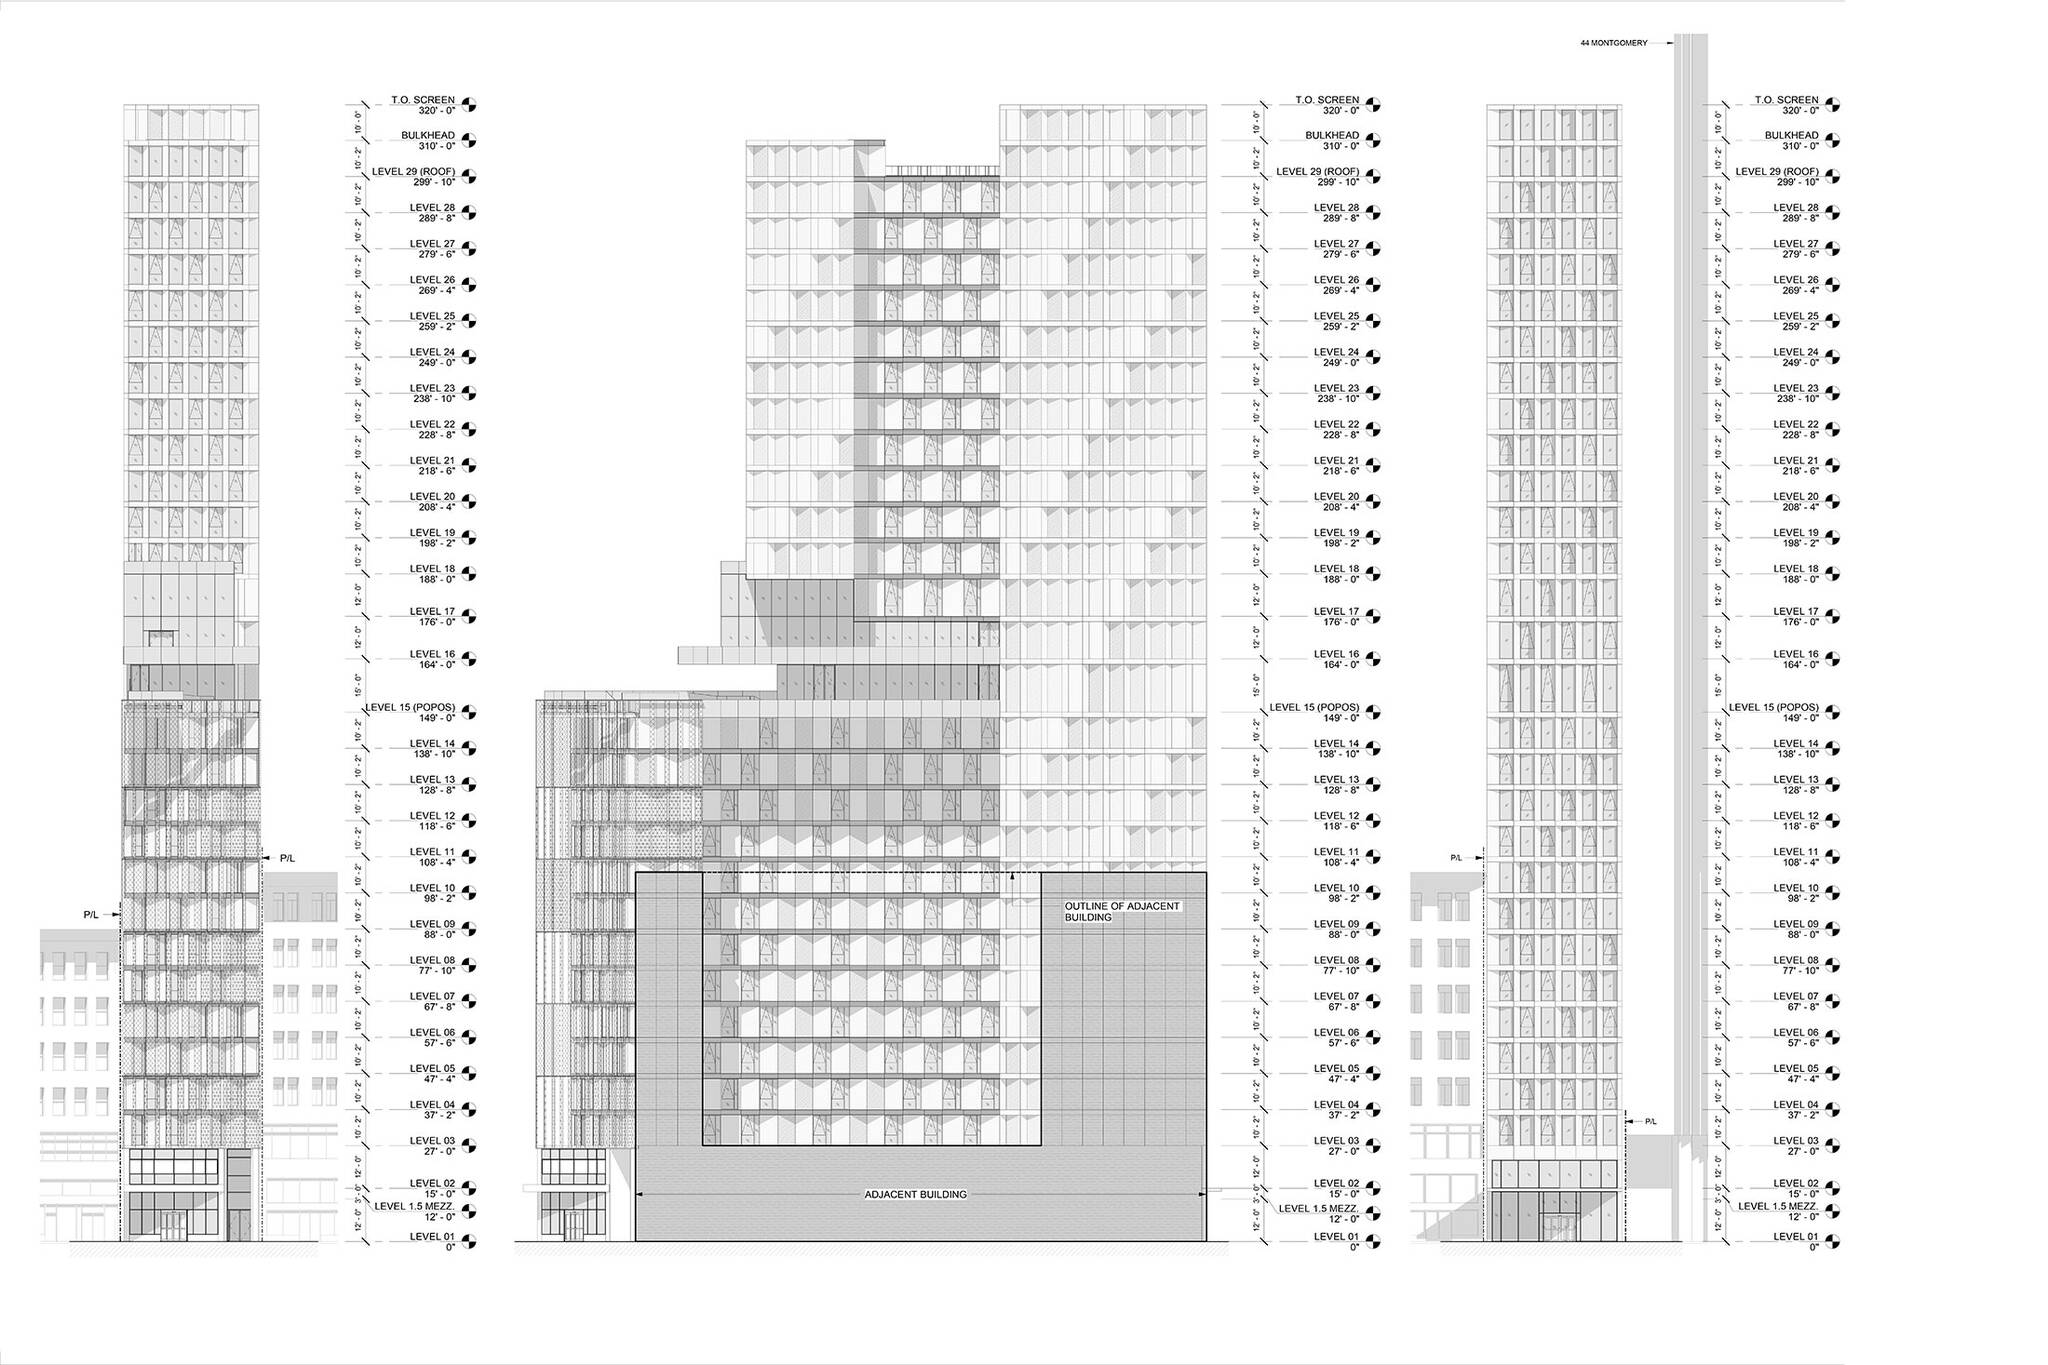 Levels diagram of the San Francisco modular project located at 570 Market Street on the Financial District of San Francisco, California designed by the architecture studio Danny Forster & Architecture